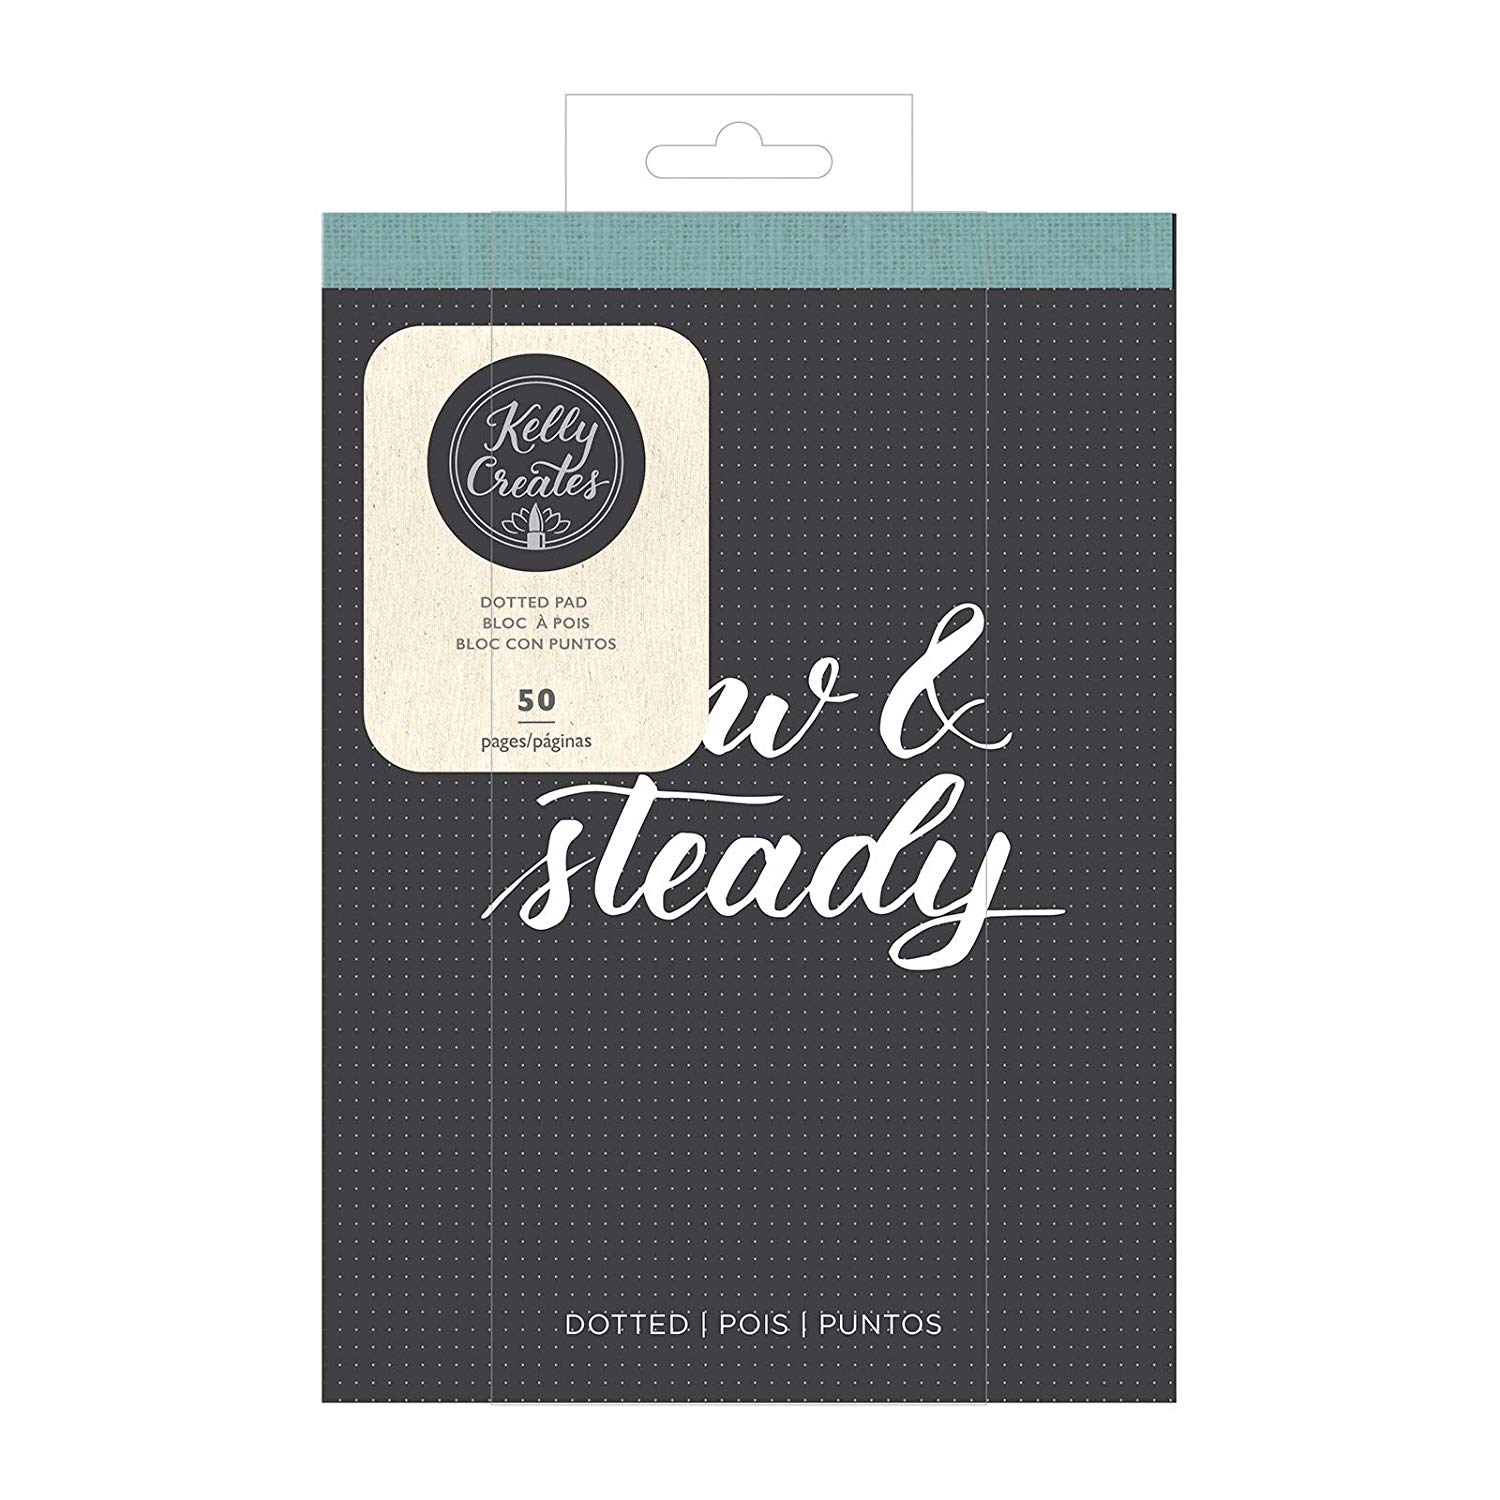 Kelly Creates • Dotted pad